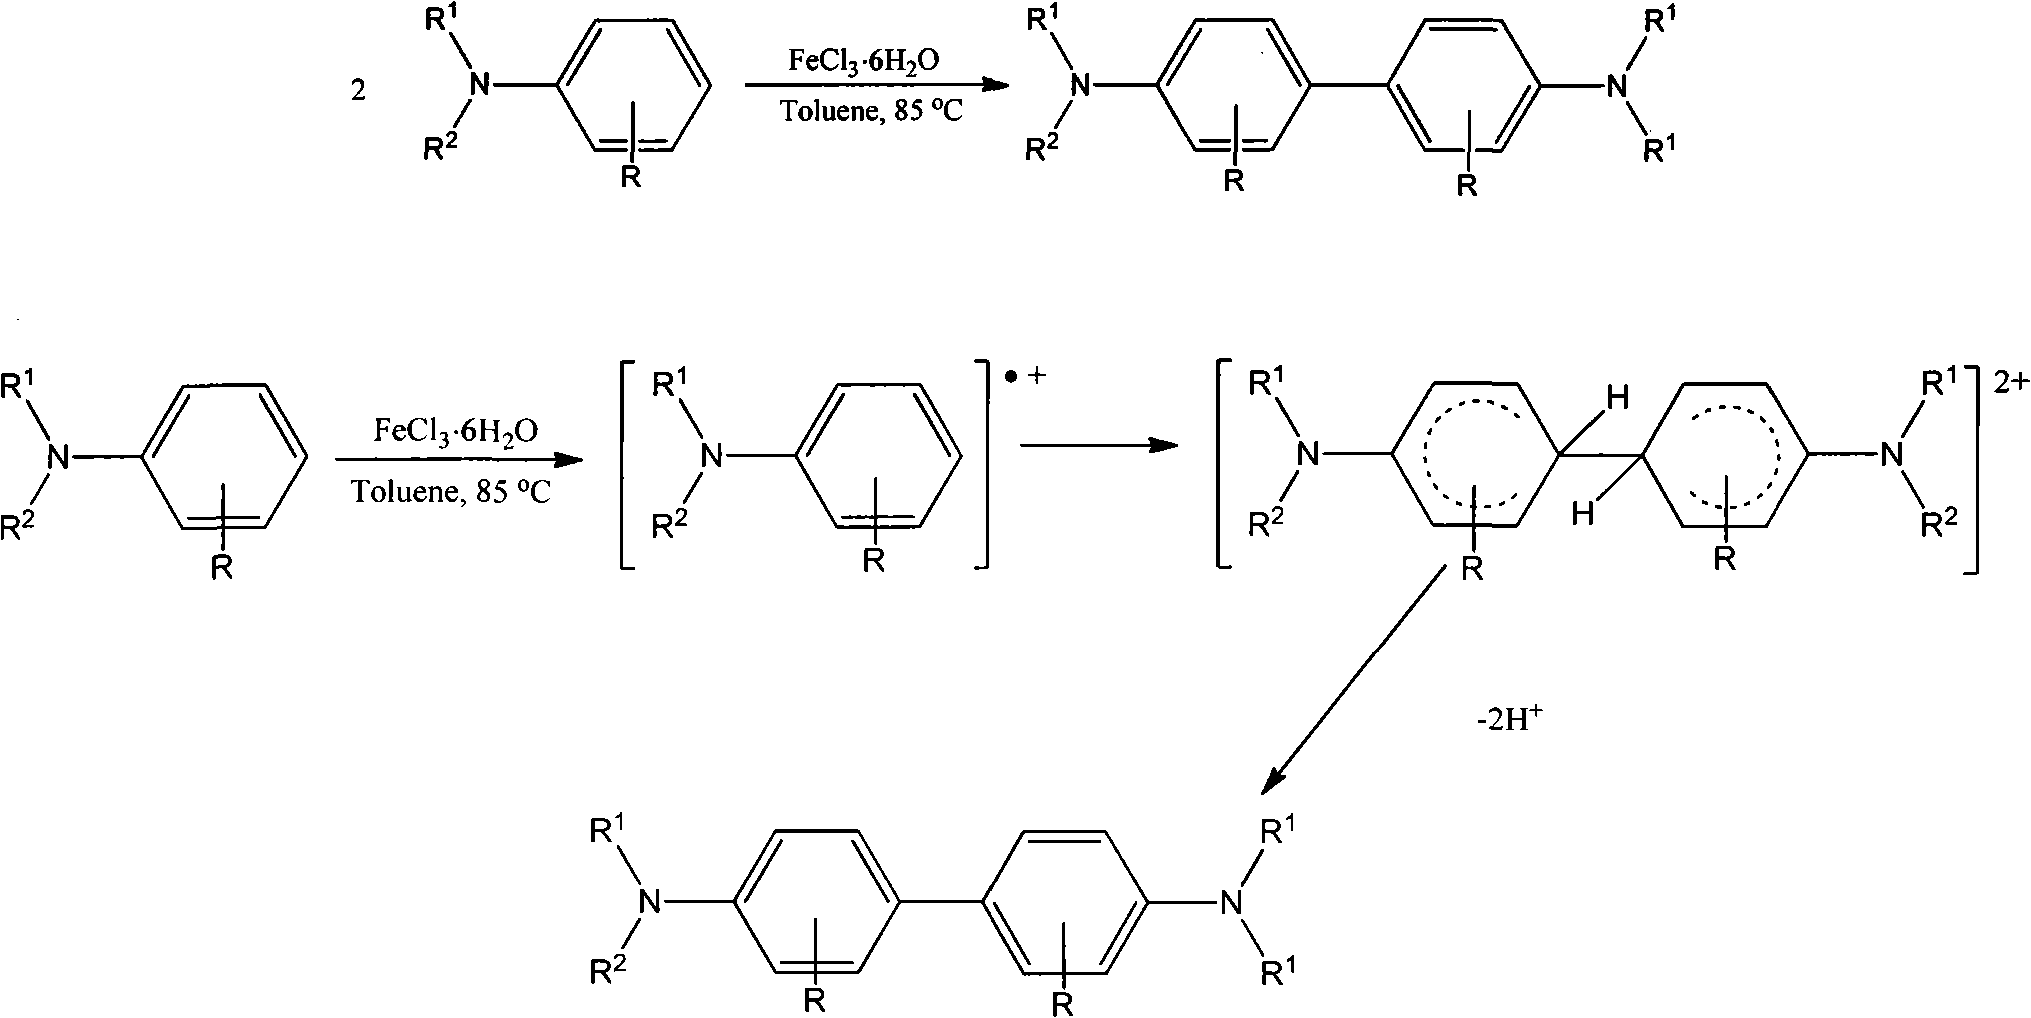 Method for one-step synthesis of diphenylenediamine derivatives through oxidative coupling reaction of phenylamine derivatives